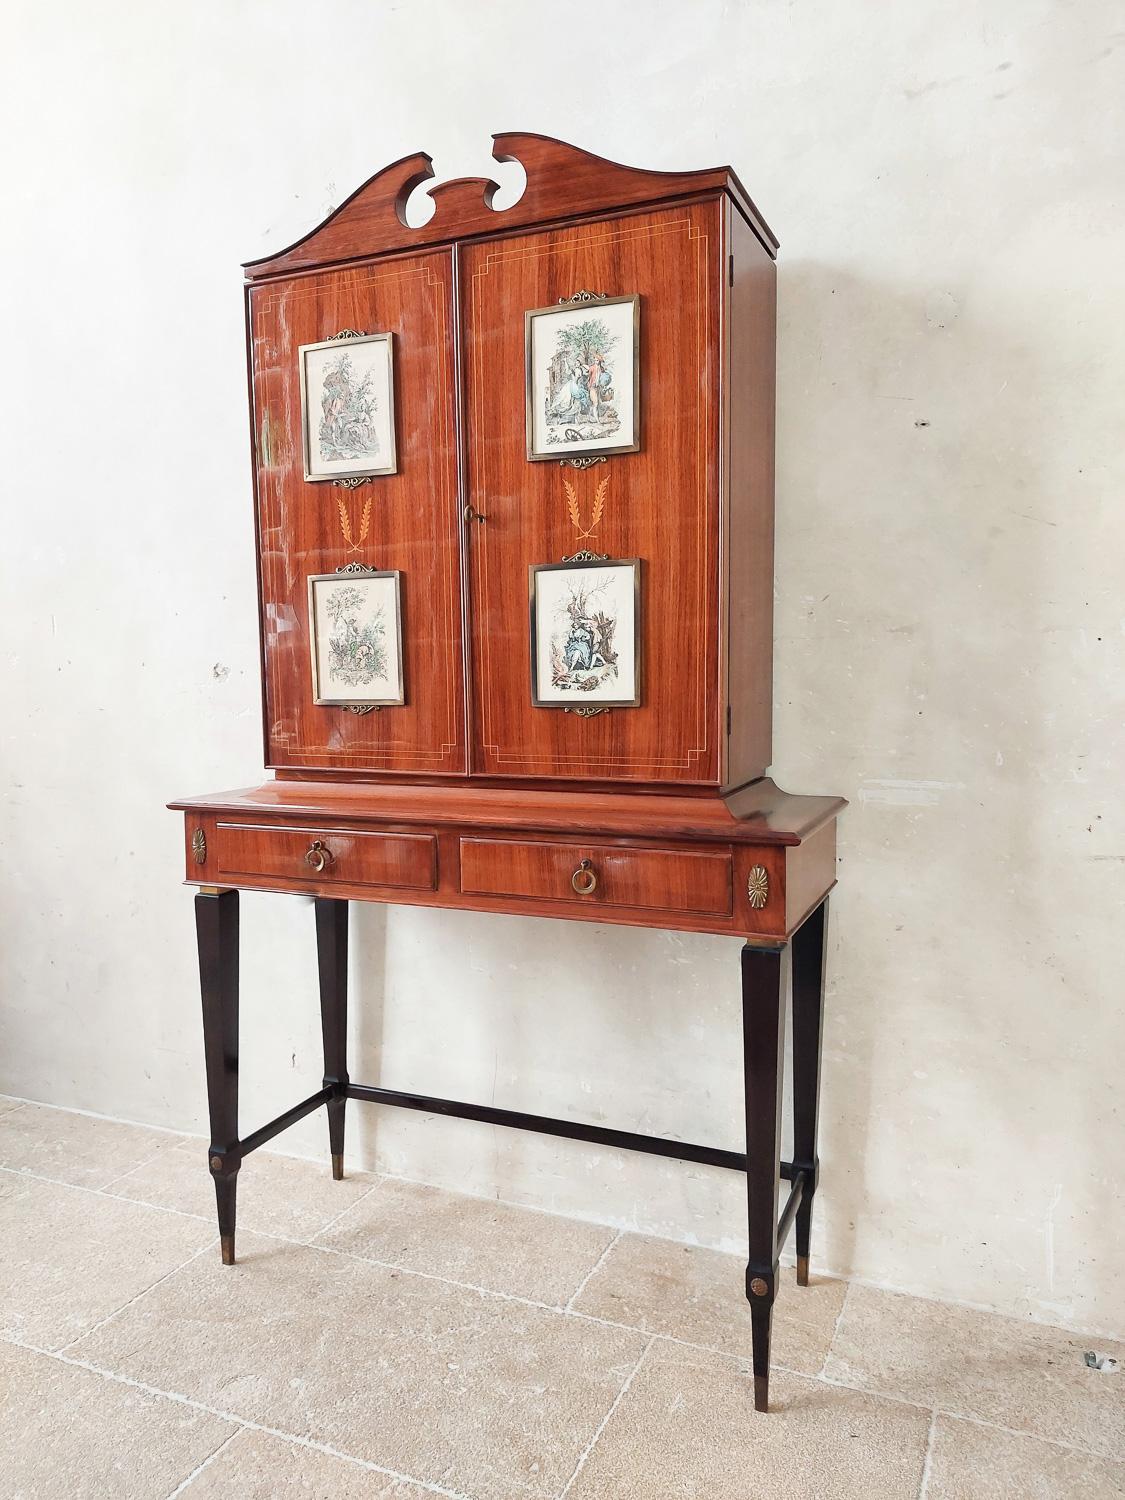 1960s Italian Designer Drinks Cabinet, Inlaid and Decorated with Etchings In Good Condition For Sale In Baambrugge, NL